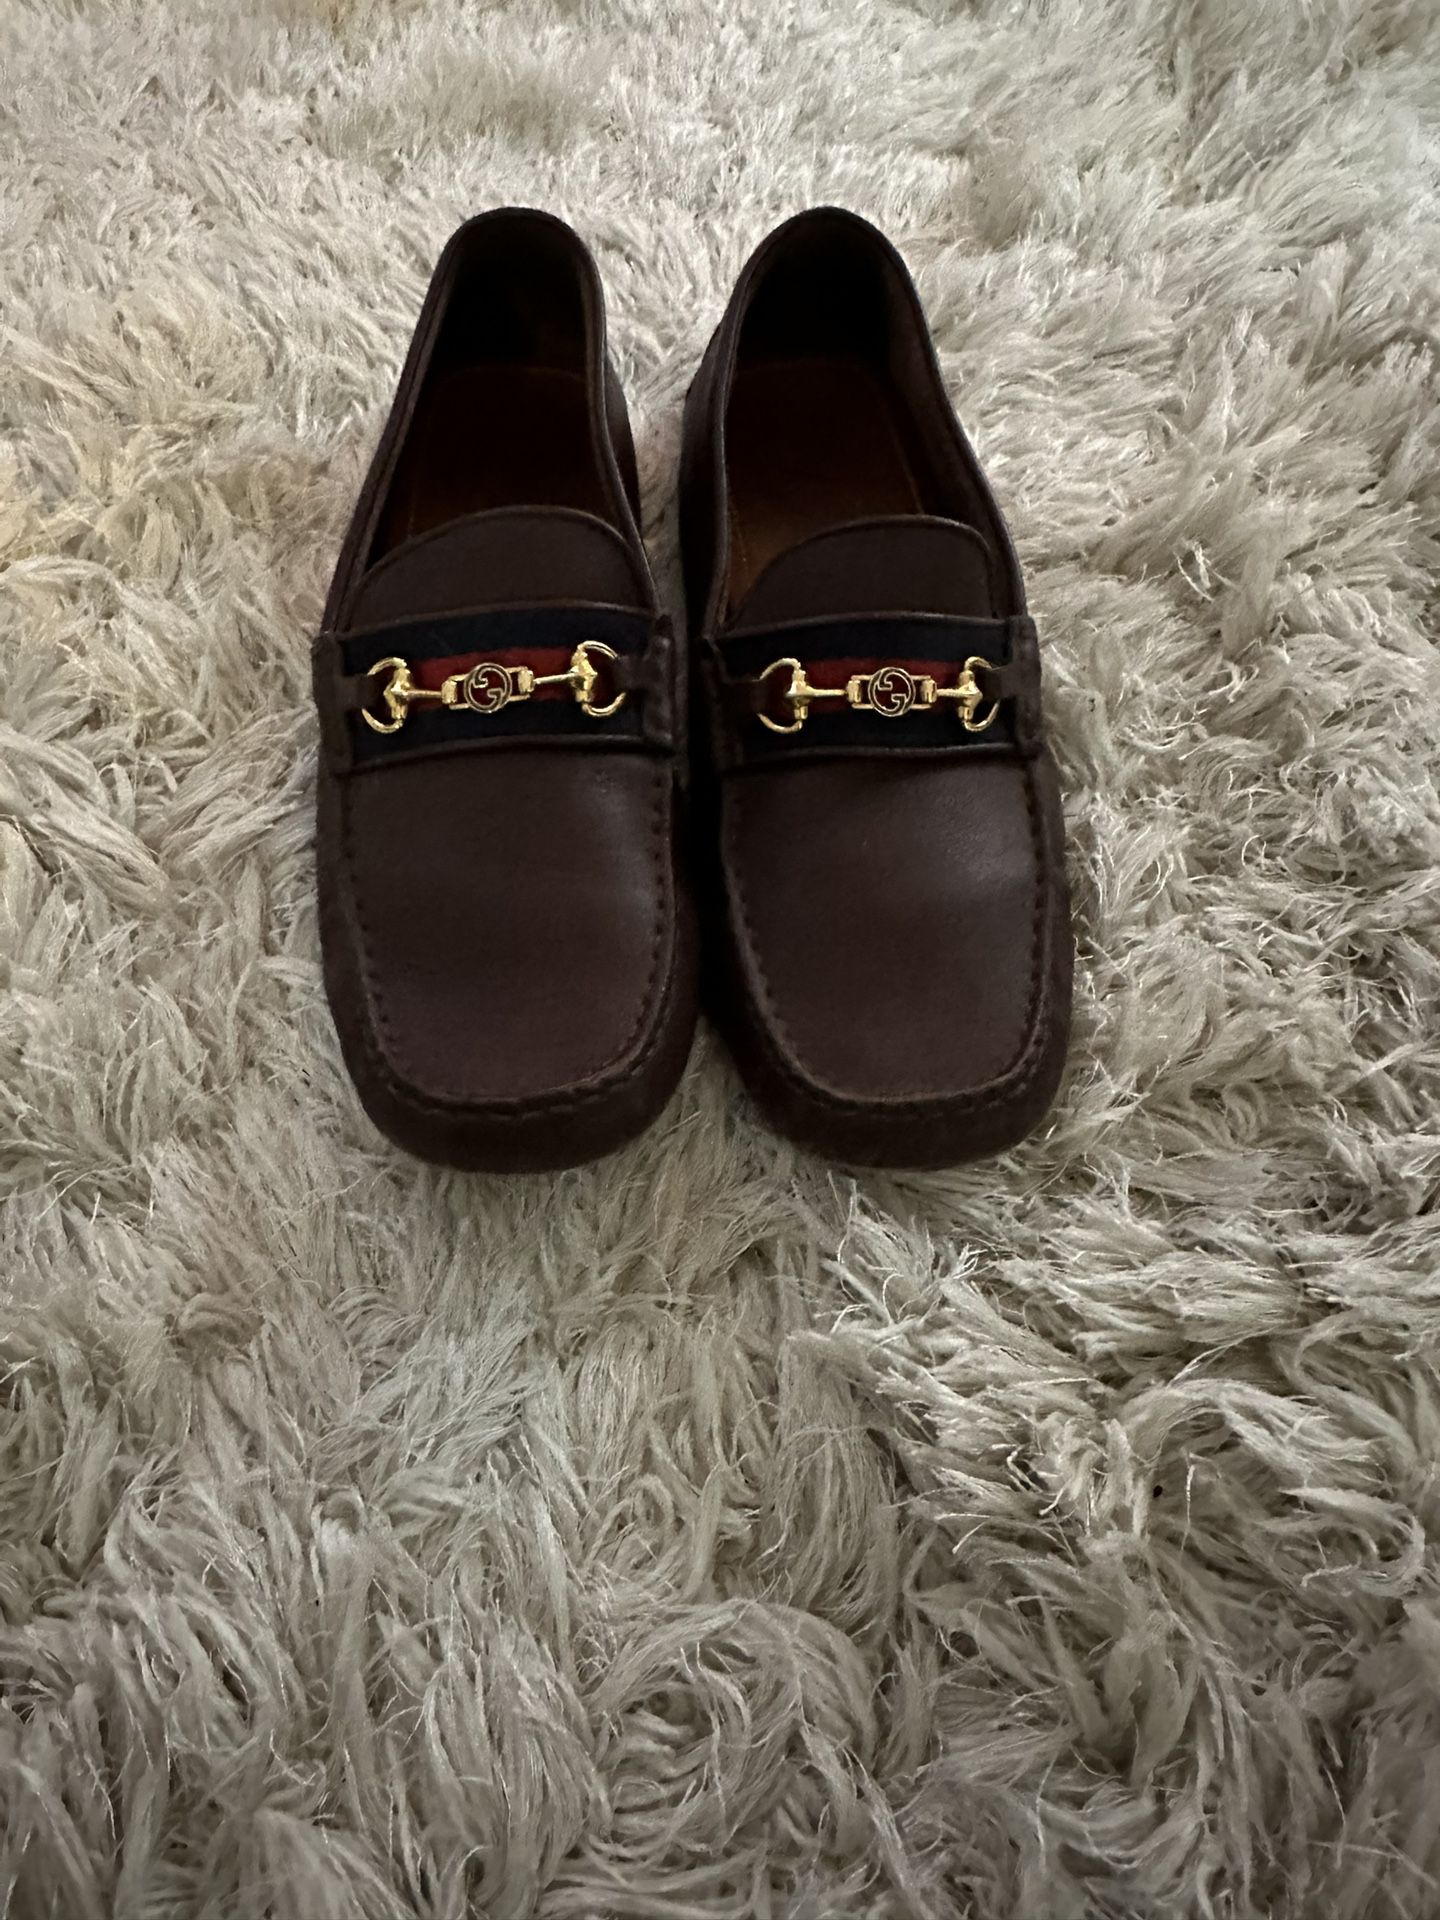 Brown Shoes GUCCI LOAFERS (Guaranteed Authentic) 